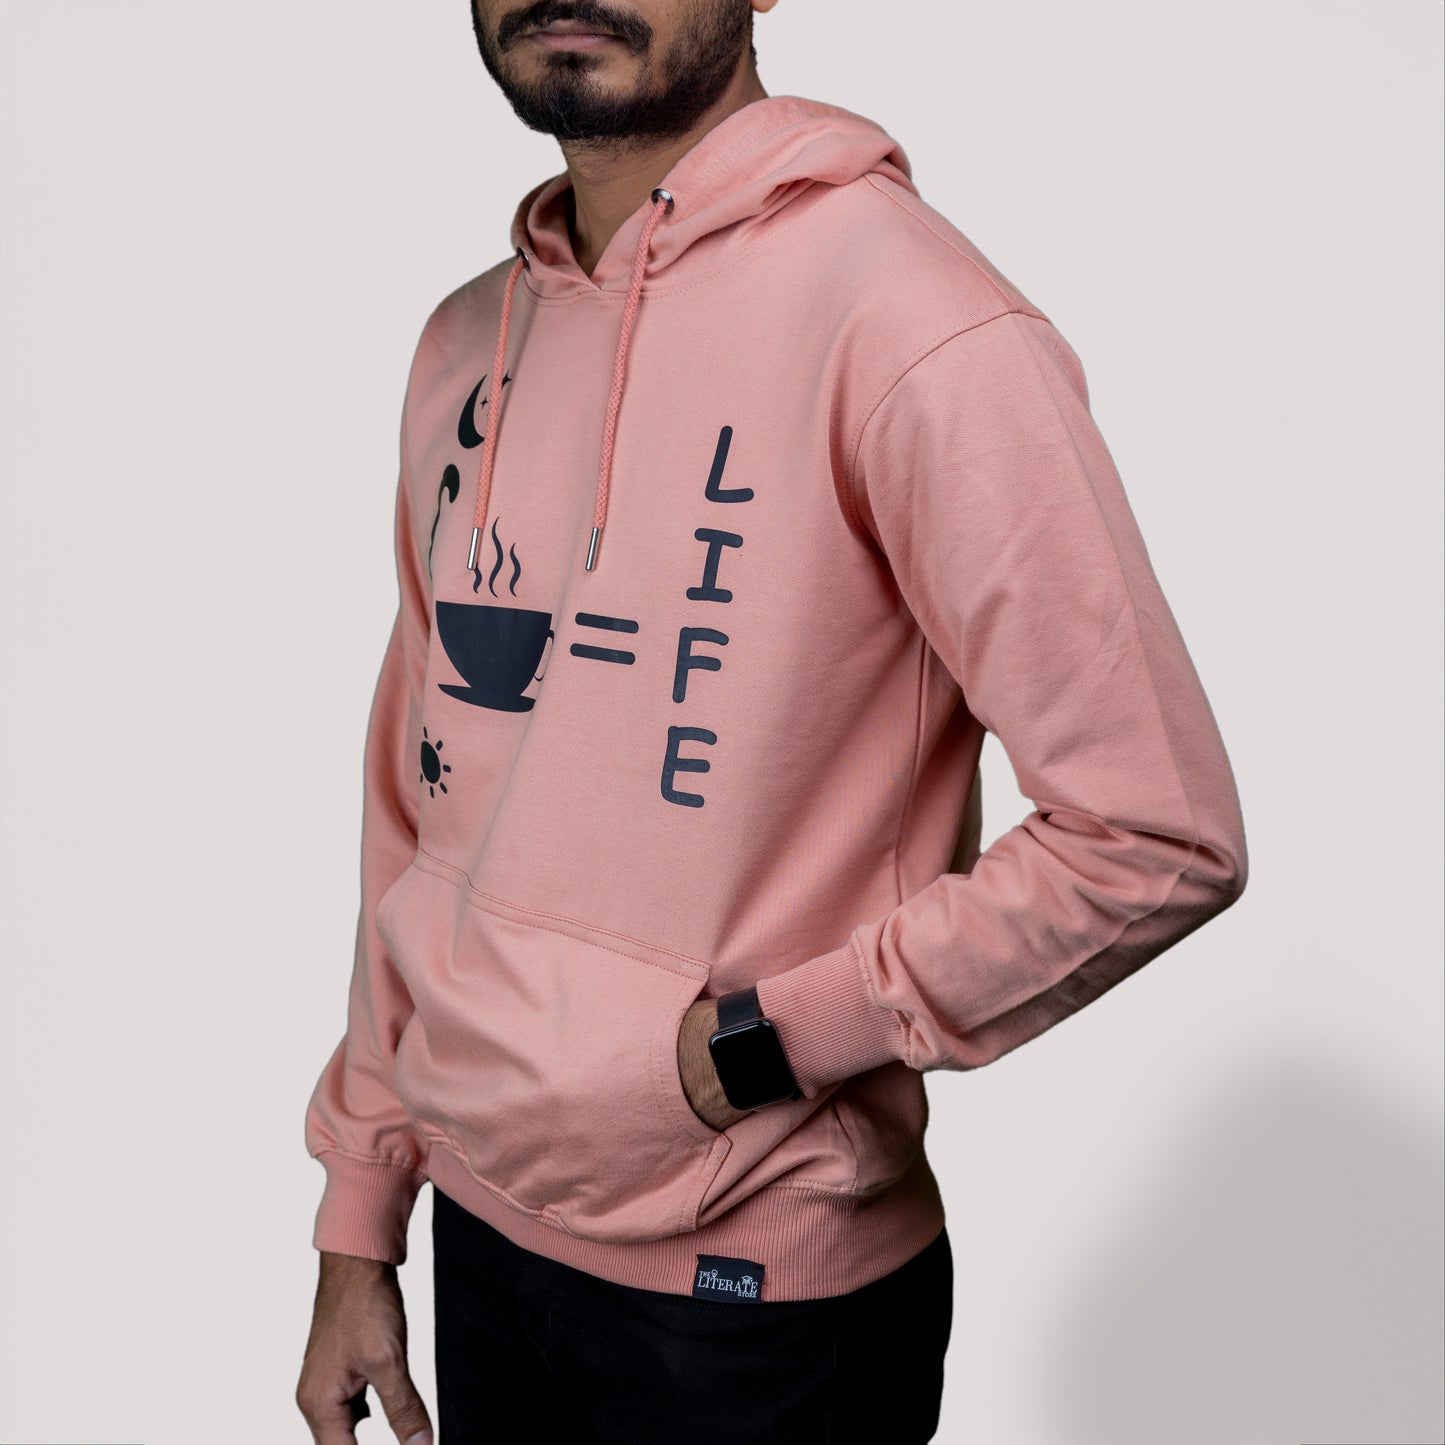 Integration of Tea/Coffee over Night and Day is Life - Men Hoodie